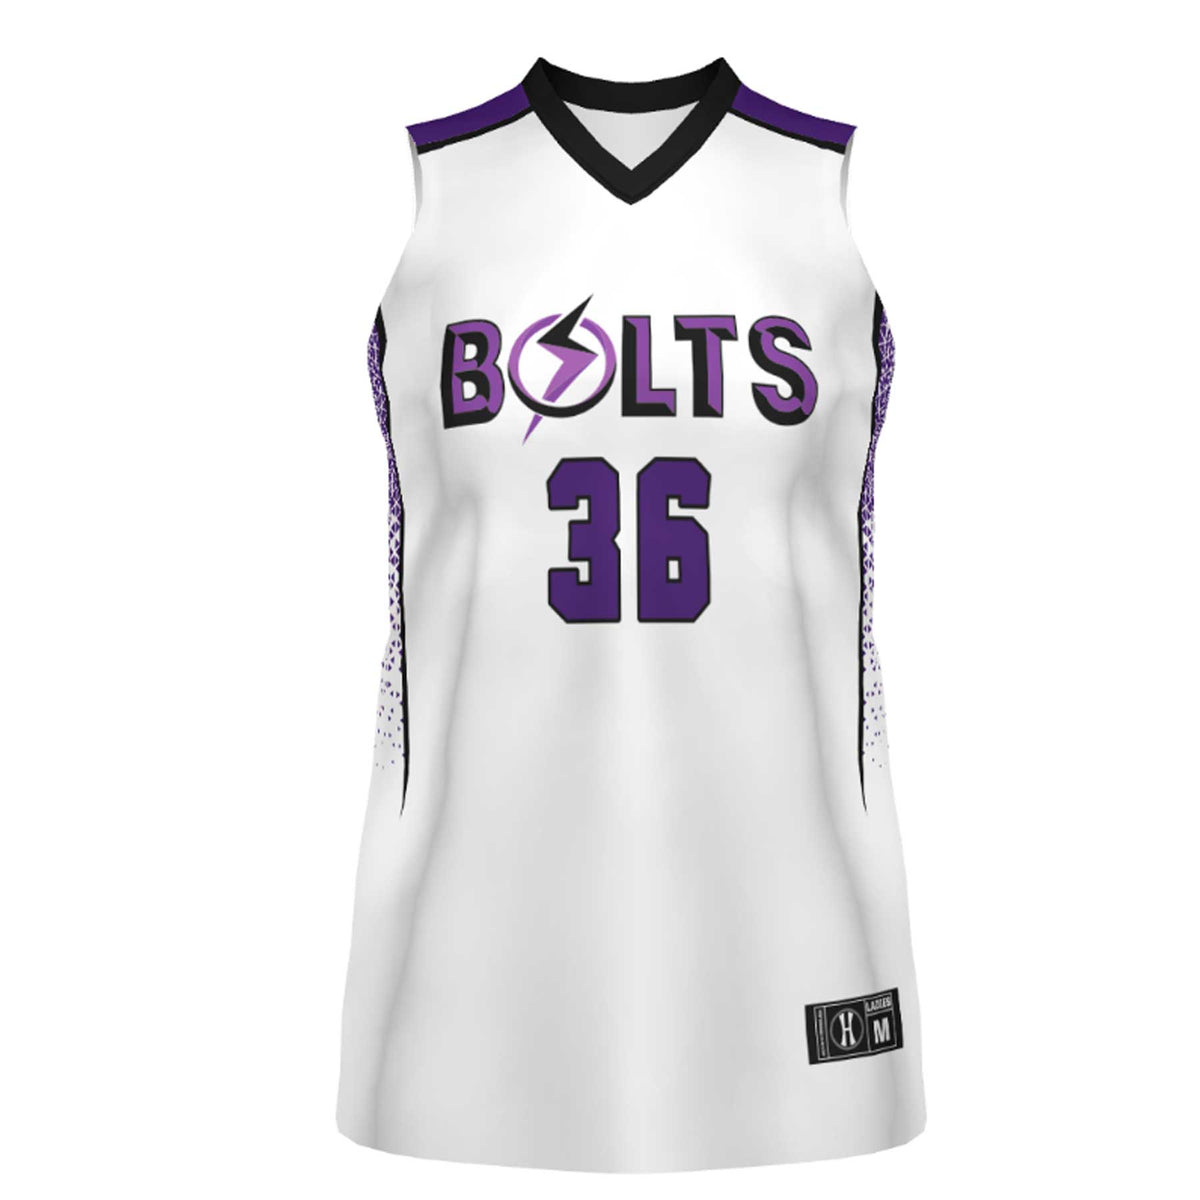 Bolts Ladies Basketball Jersey